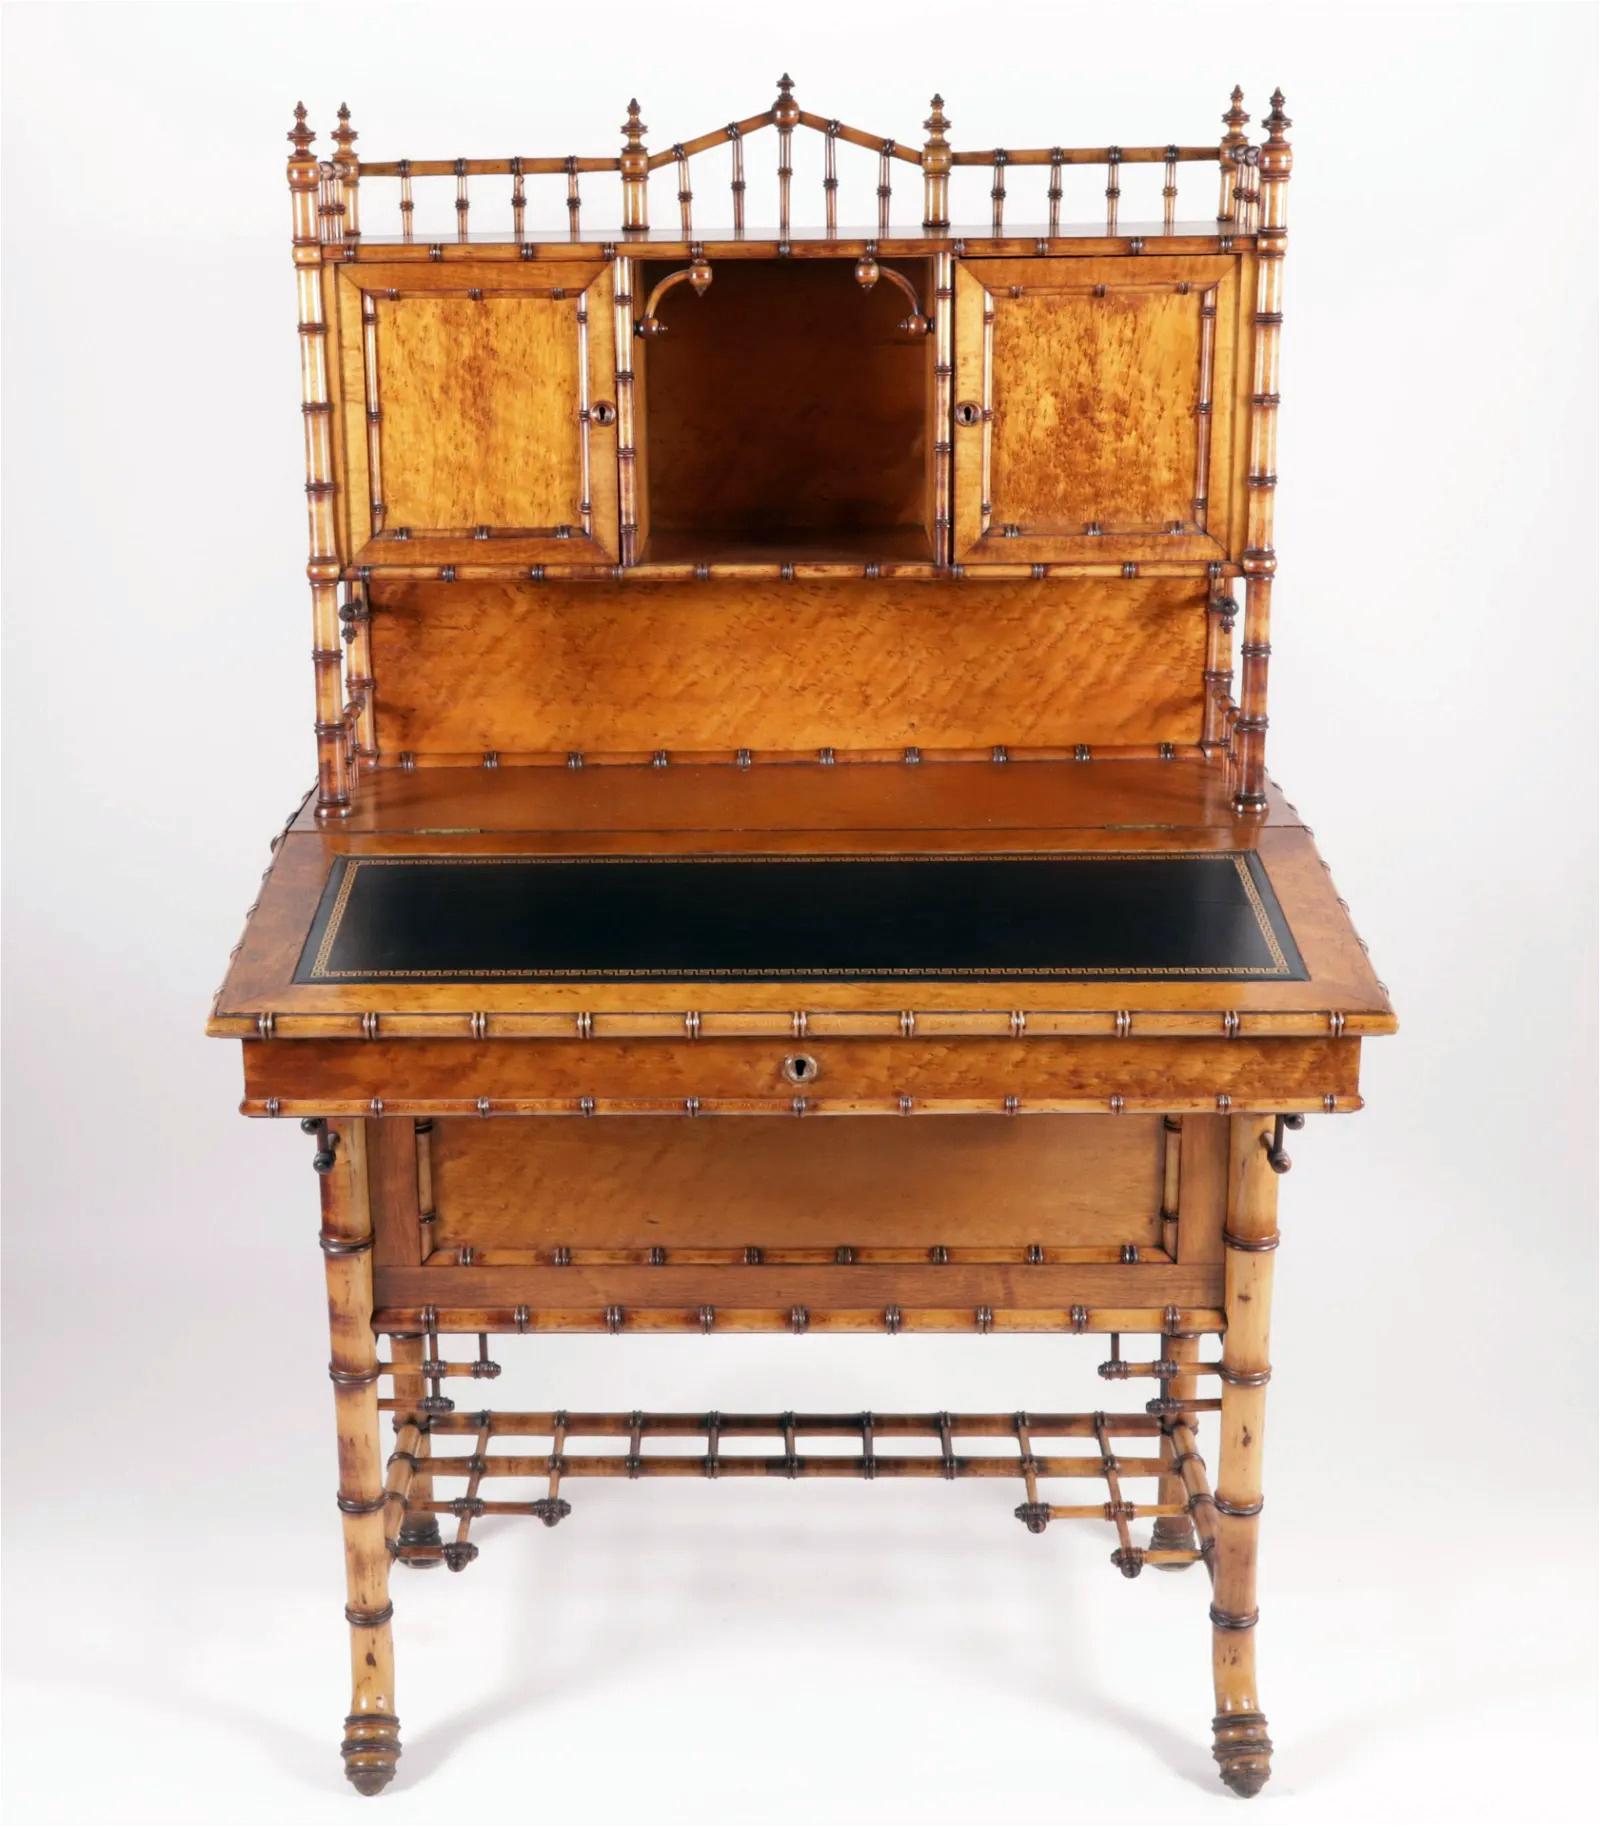 Bamboo and Birch Satinwood Desk
19th century

An exotic bamboo and satinwood desk in a Chinese Chippendale style. The upper section is topped with a pierced gallery accented with finials, sitting above a central open shelf flanked by two doors.